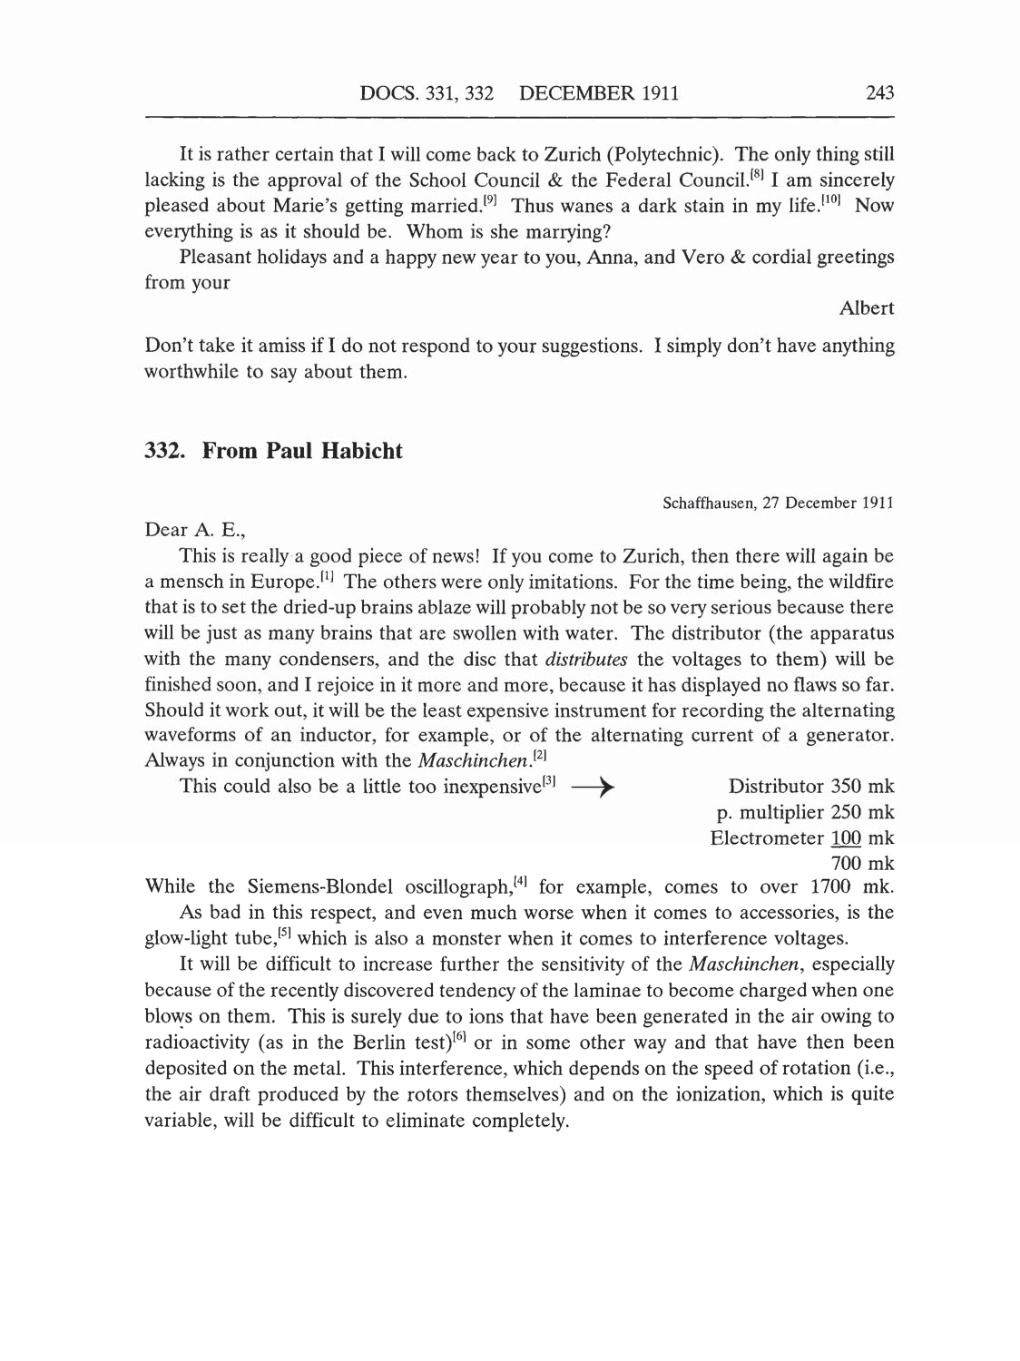 Volume 5: The Swiss Years: Correspondence, 1902-1914 (English translation supplement) page 243